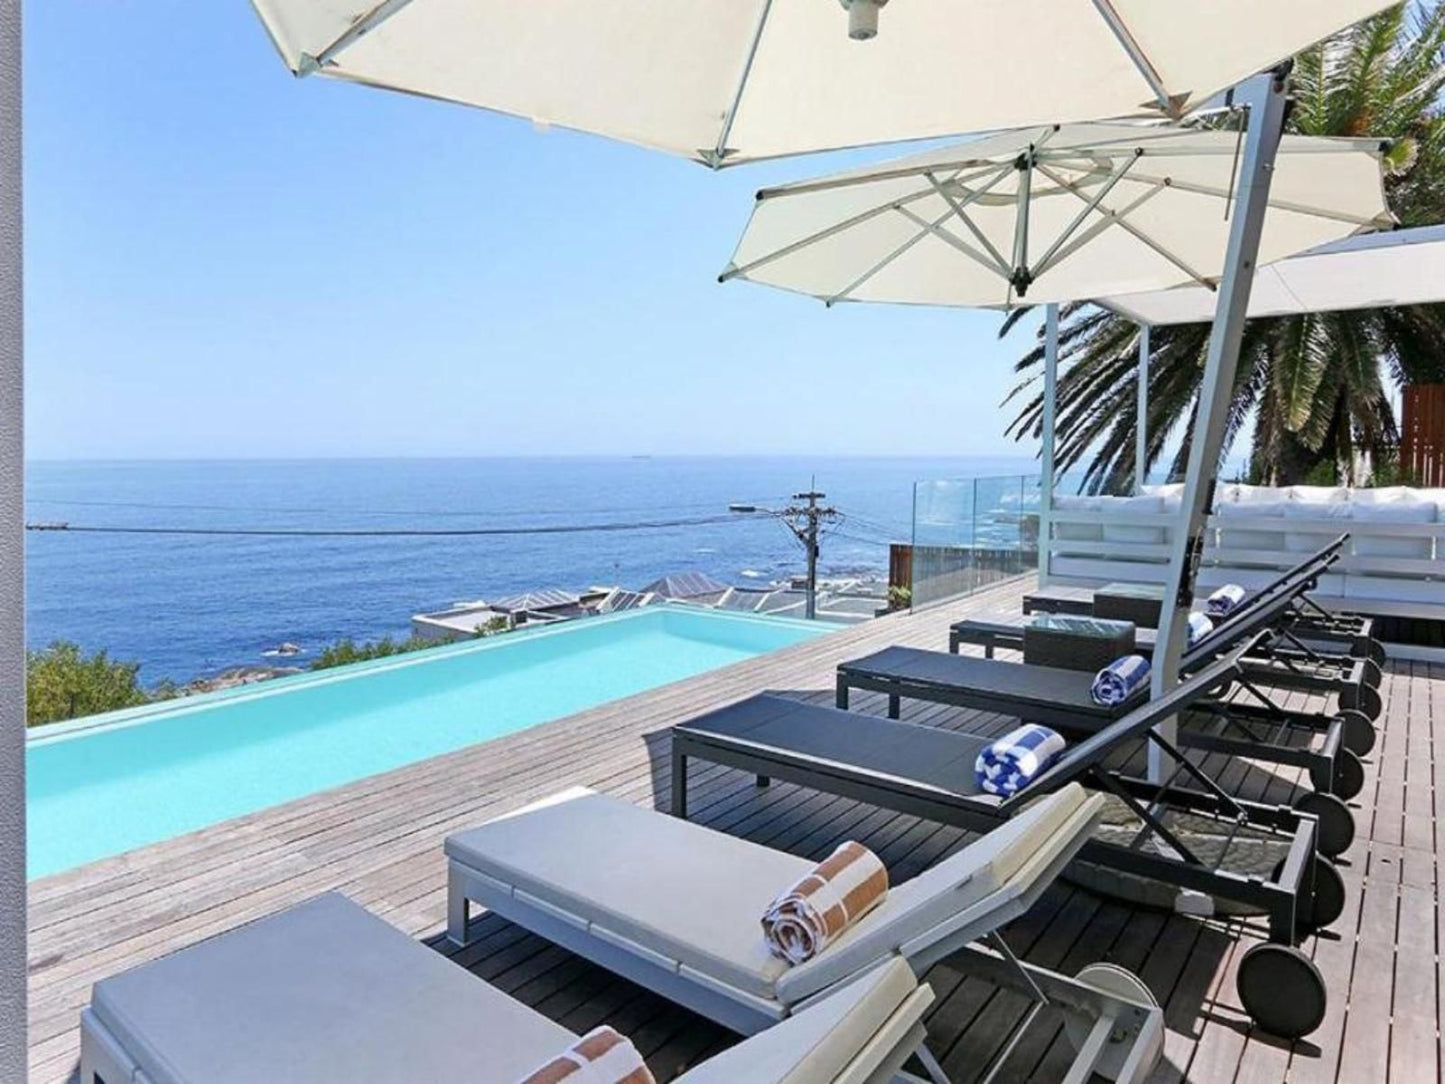 Villa Dolce Vita Camps Bay Cape Town Western Cape South Africa Balcony, Architecture, Beach, Nature, Sand, Swimming Pool